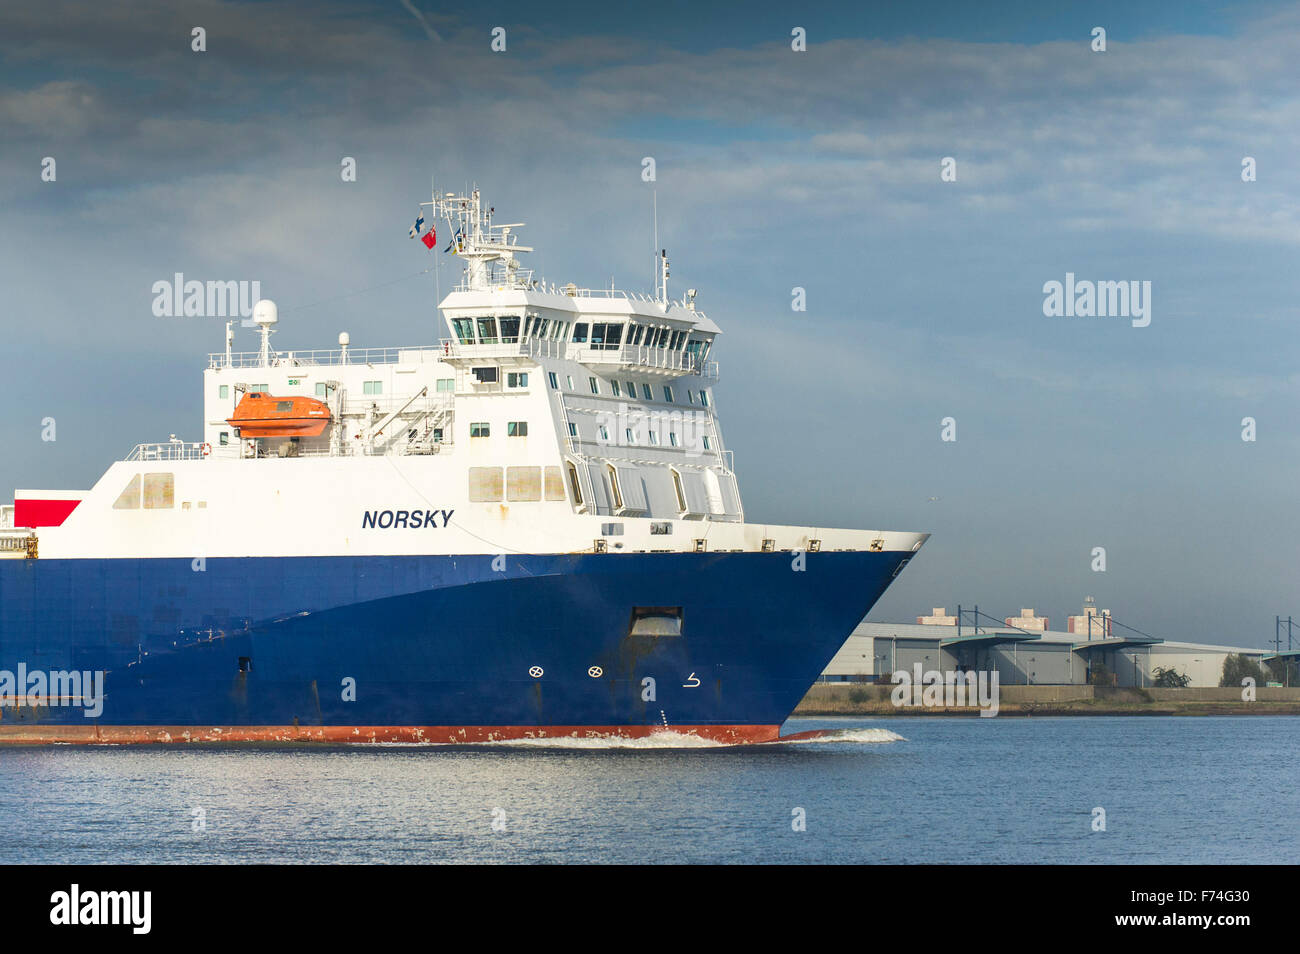 https://c8.alamy.com/comp/F74G30/the-ro-ro-cargo-ship-norsky-leaves-the-port-of-tilbury-and-steams-F74G30.jpg